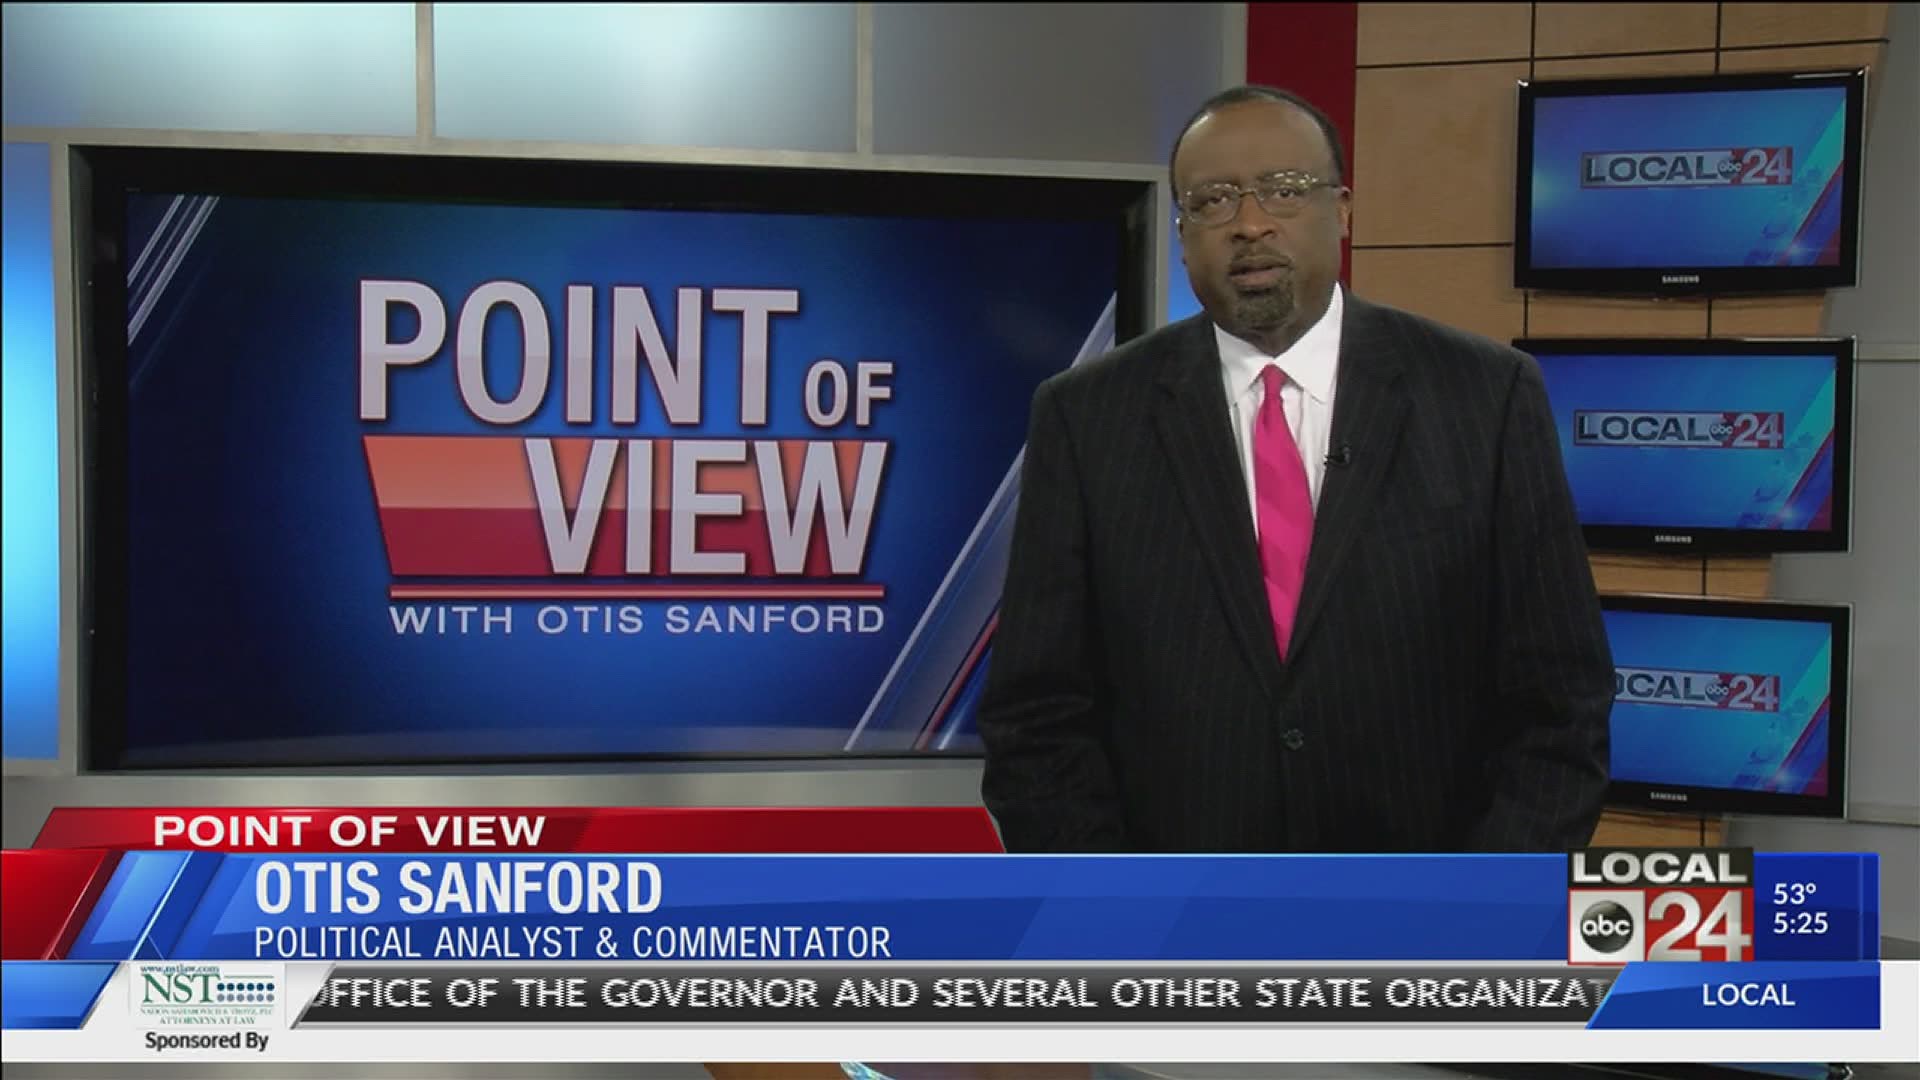 Local 24 News political analyst and commentator Otis Sanford shares his point of view on TN Gov. Bill Lee's permit-less carry gun bill.